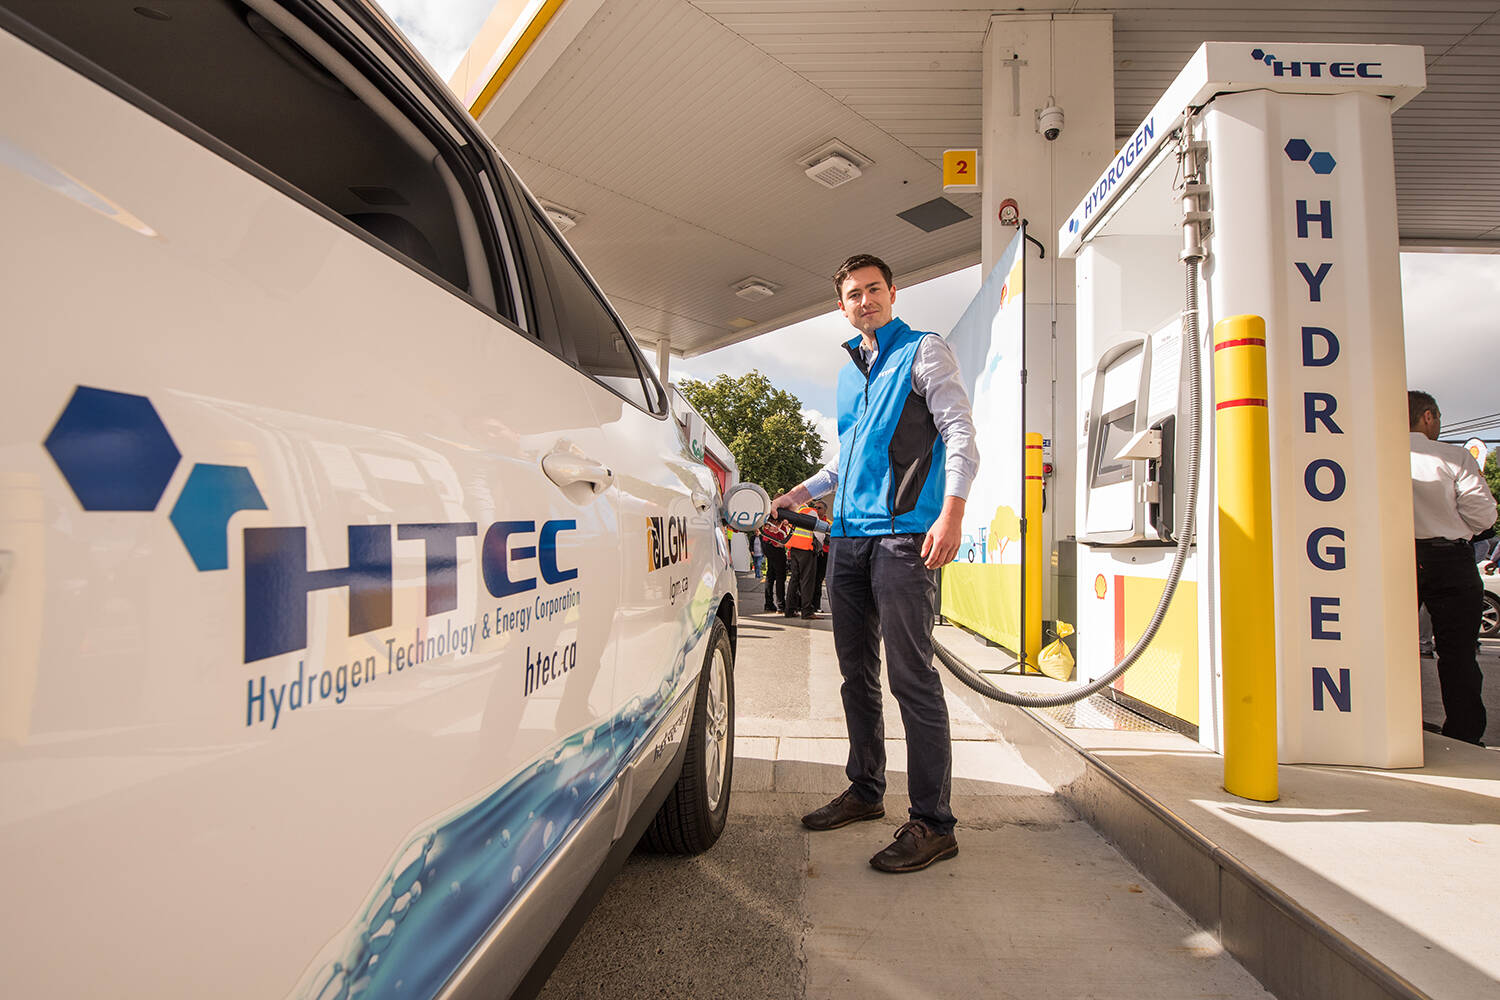 HTEC, which currently operates five hydrogen fuels stations in B.C., Friday received hundreds of millions of dollars to build up to 20 such stations across western Canada with 18 in B.C. and two in Alberta. (Submitted).